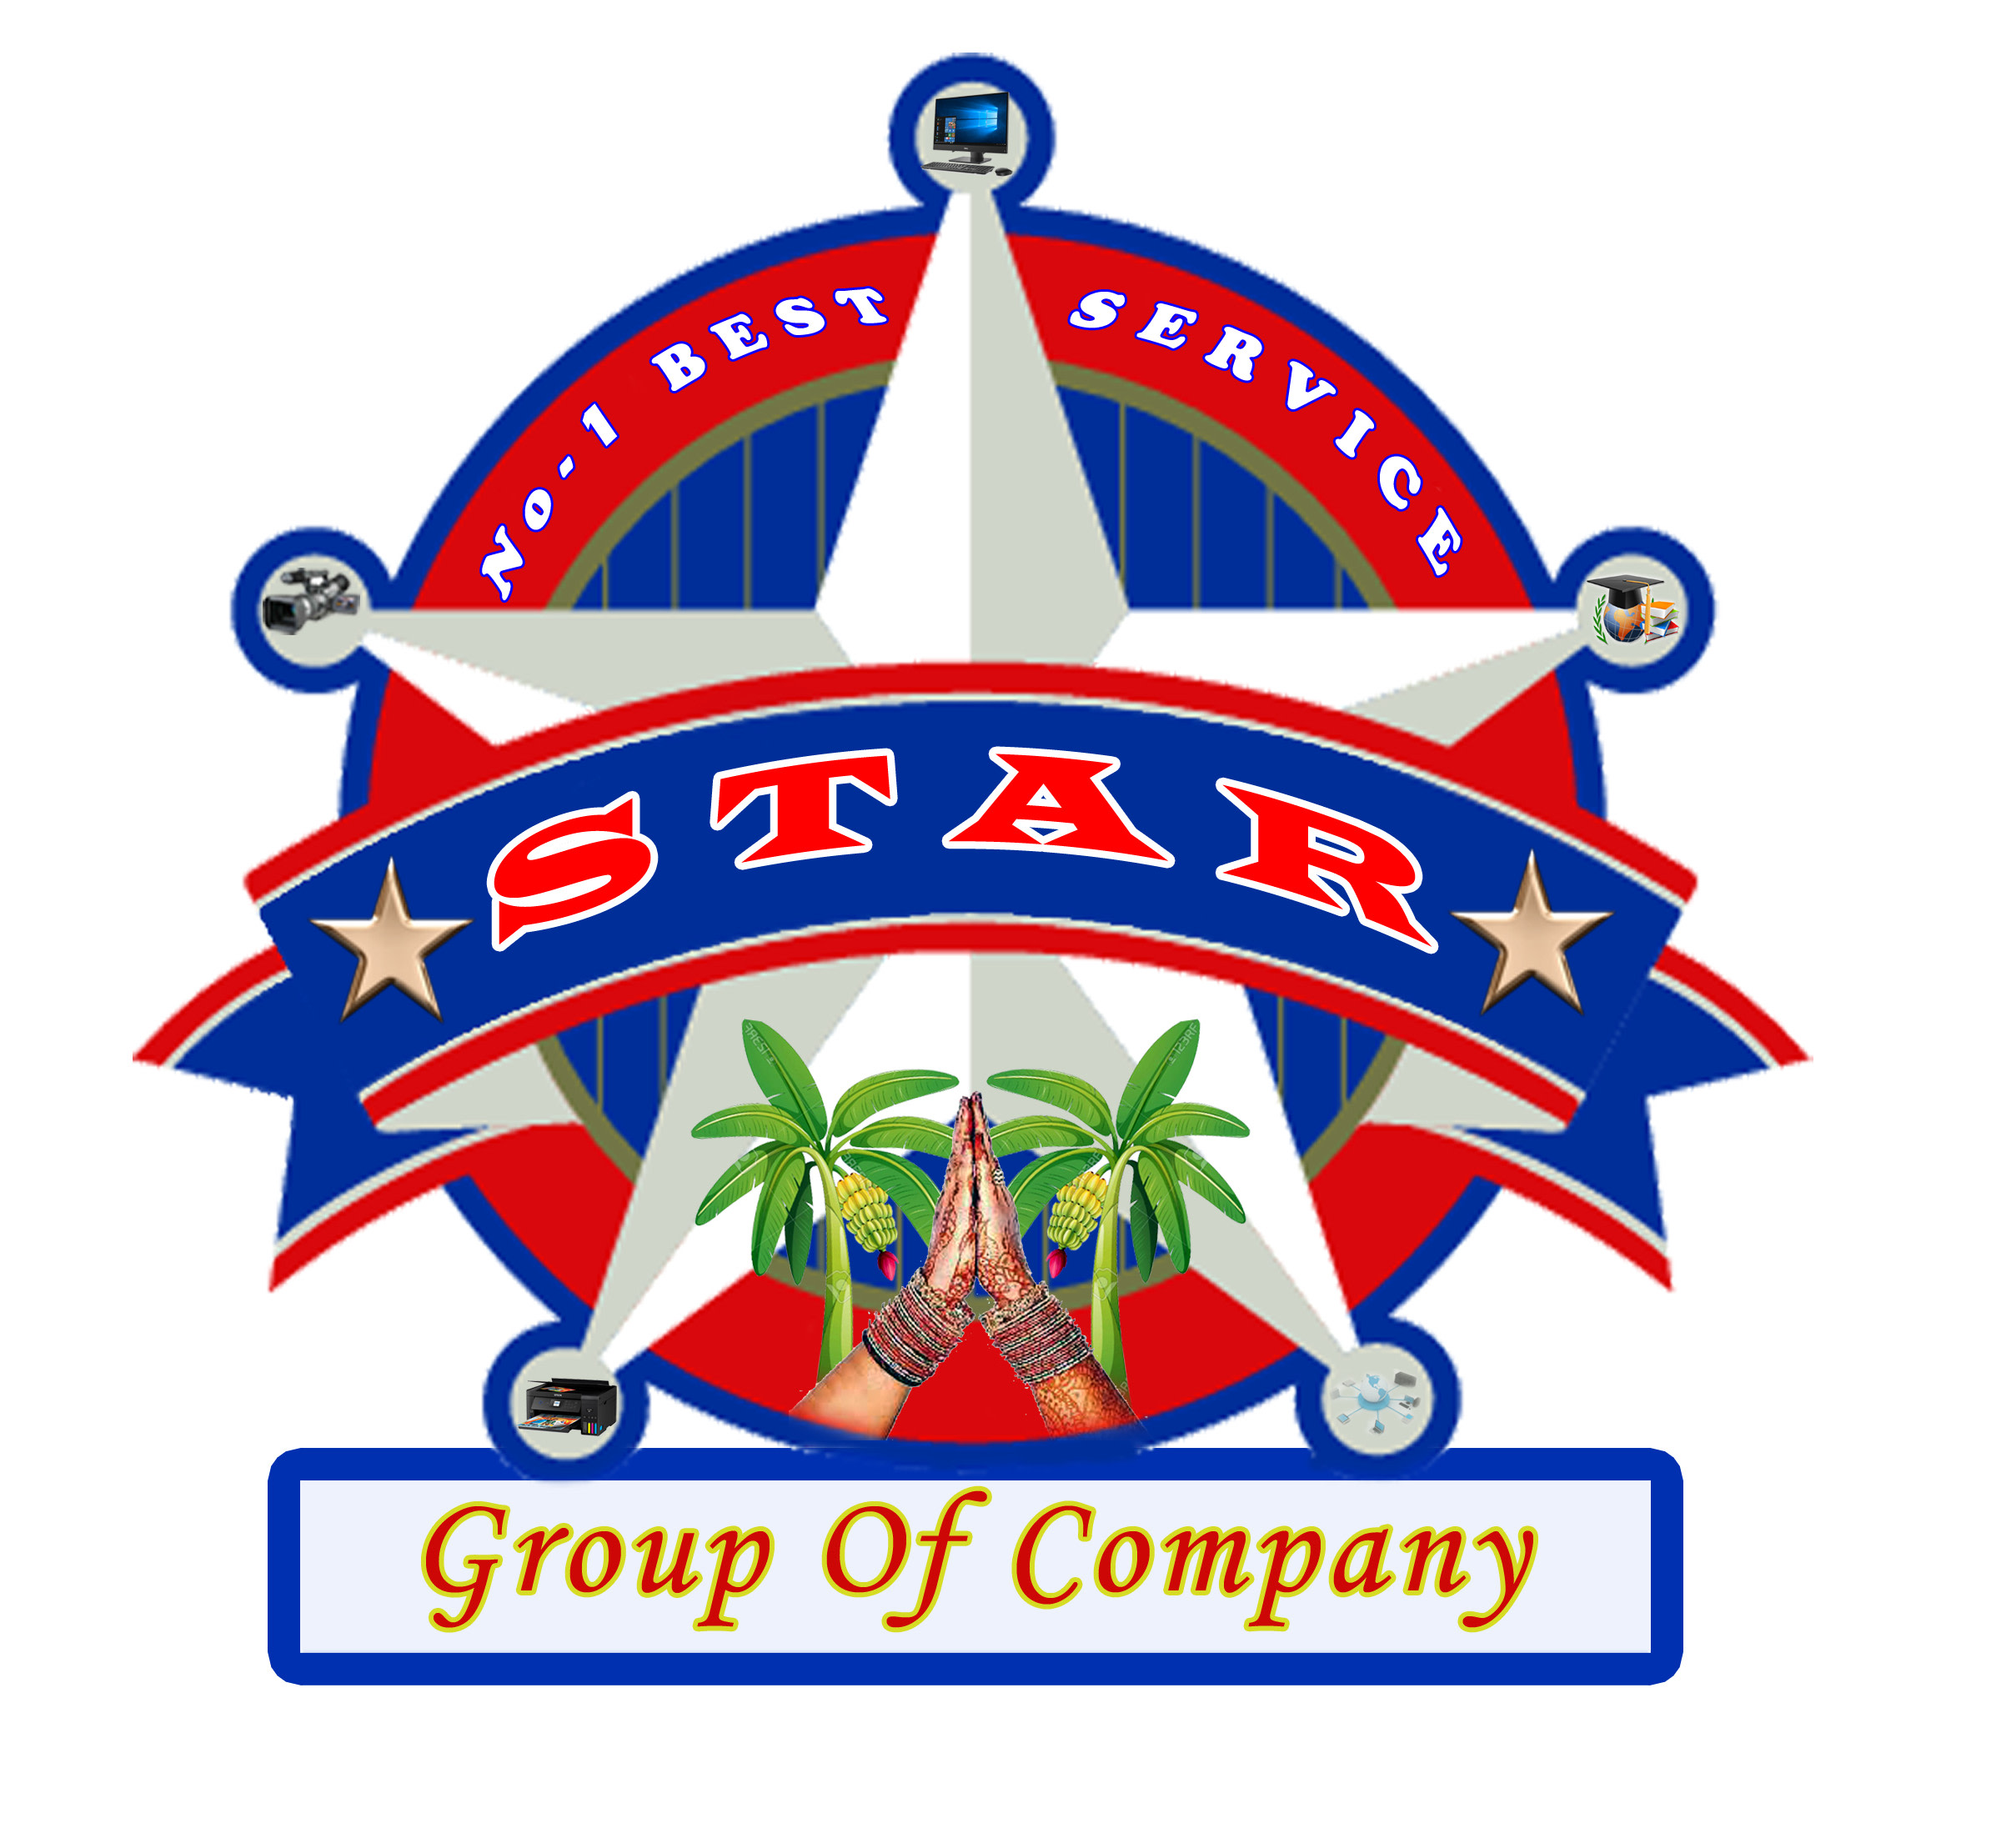 Star Groups Of Company